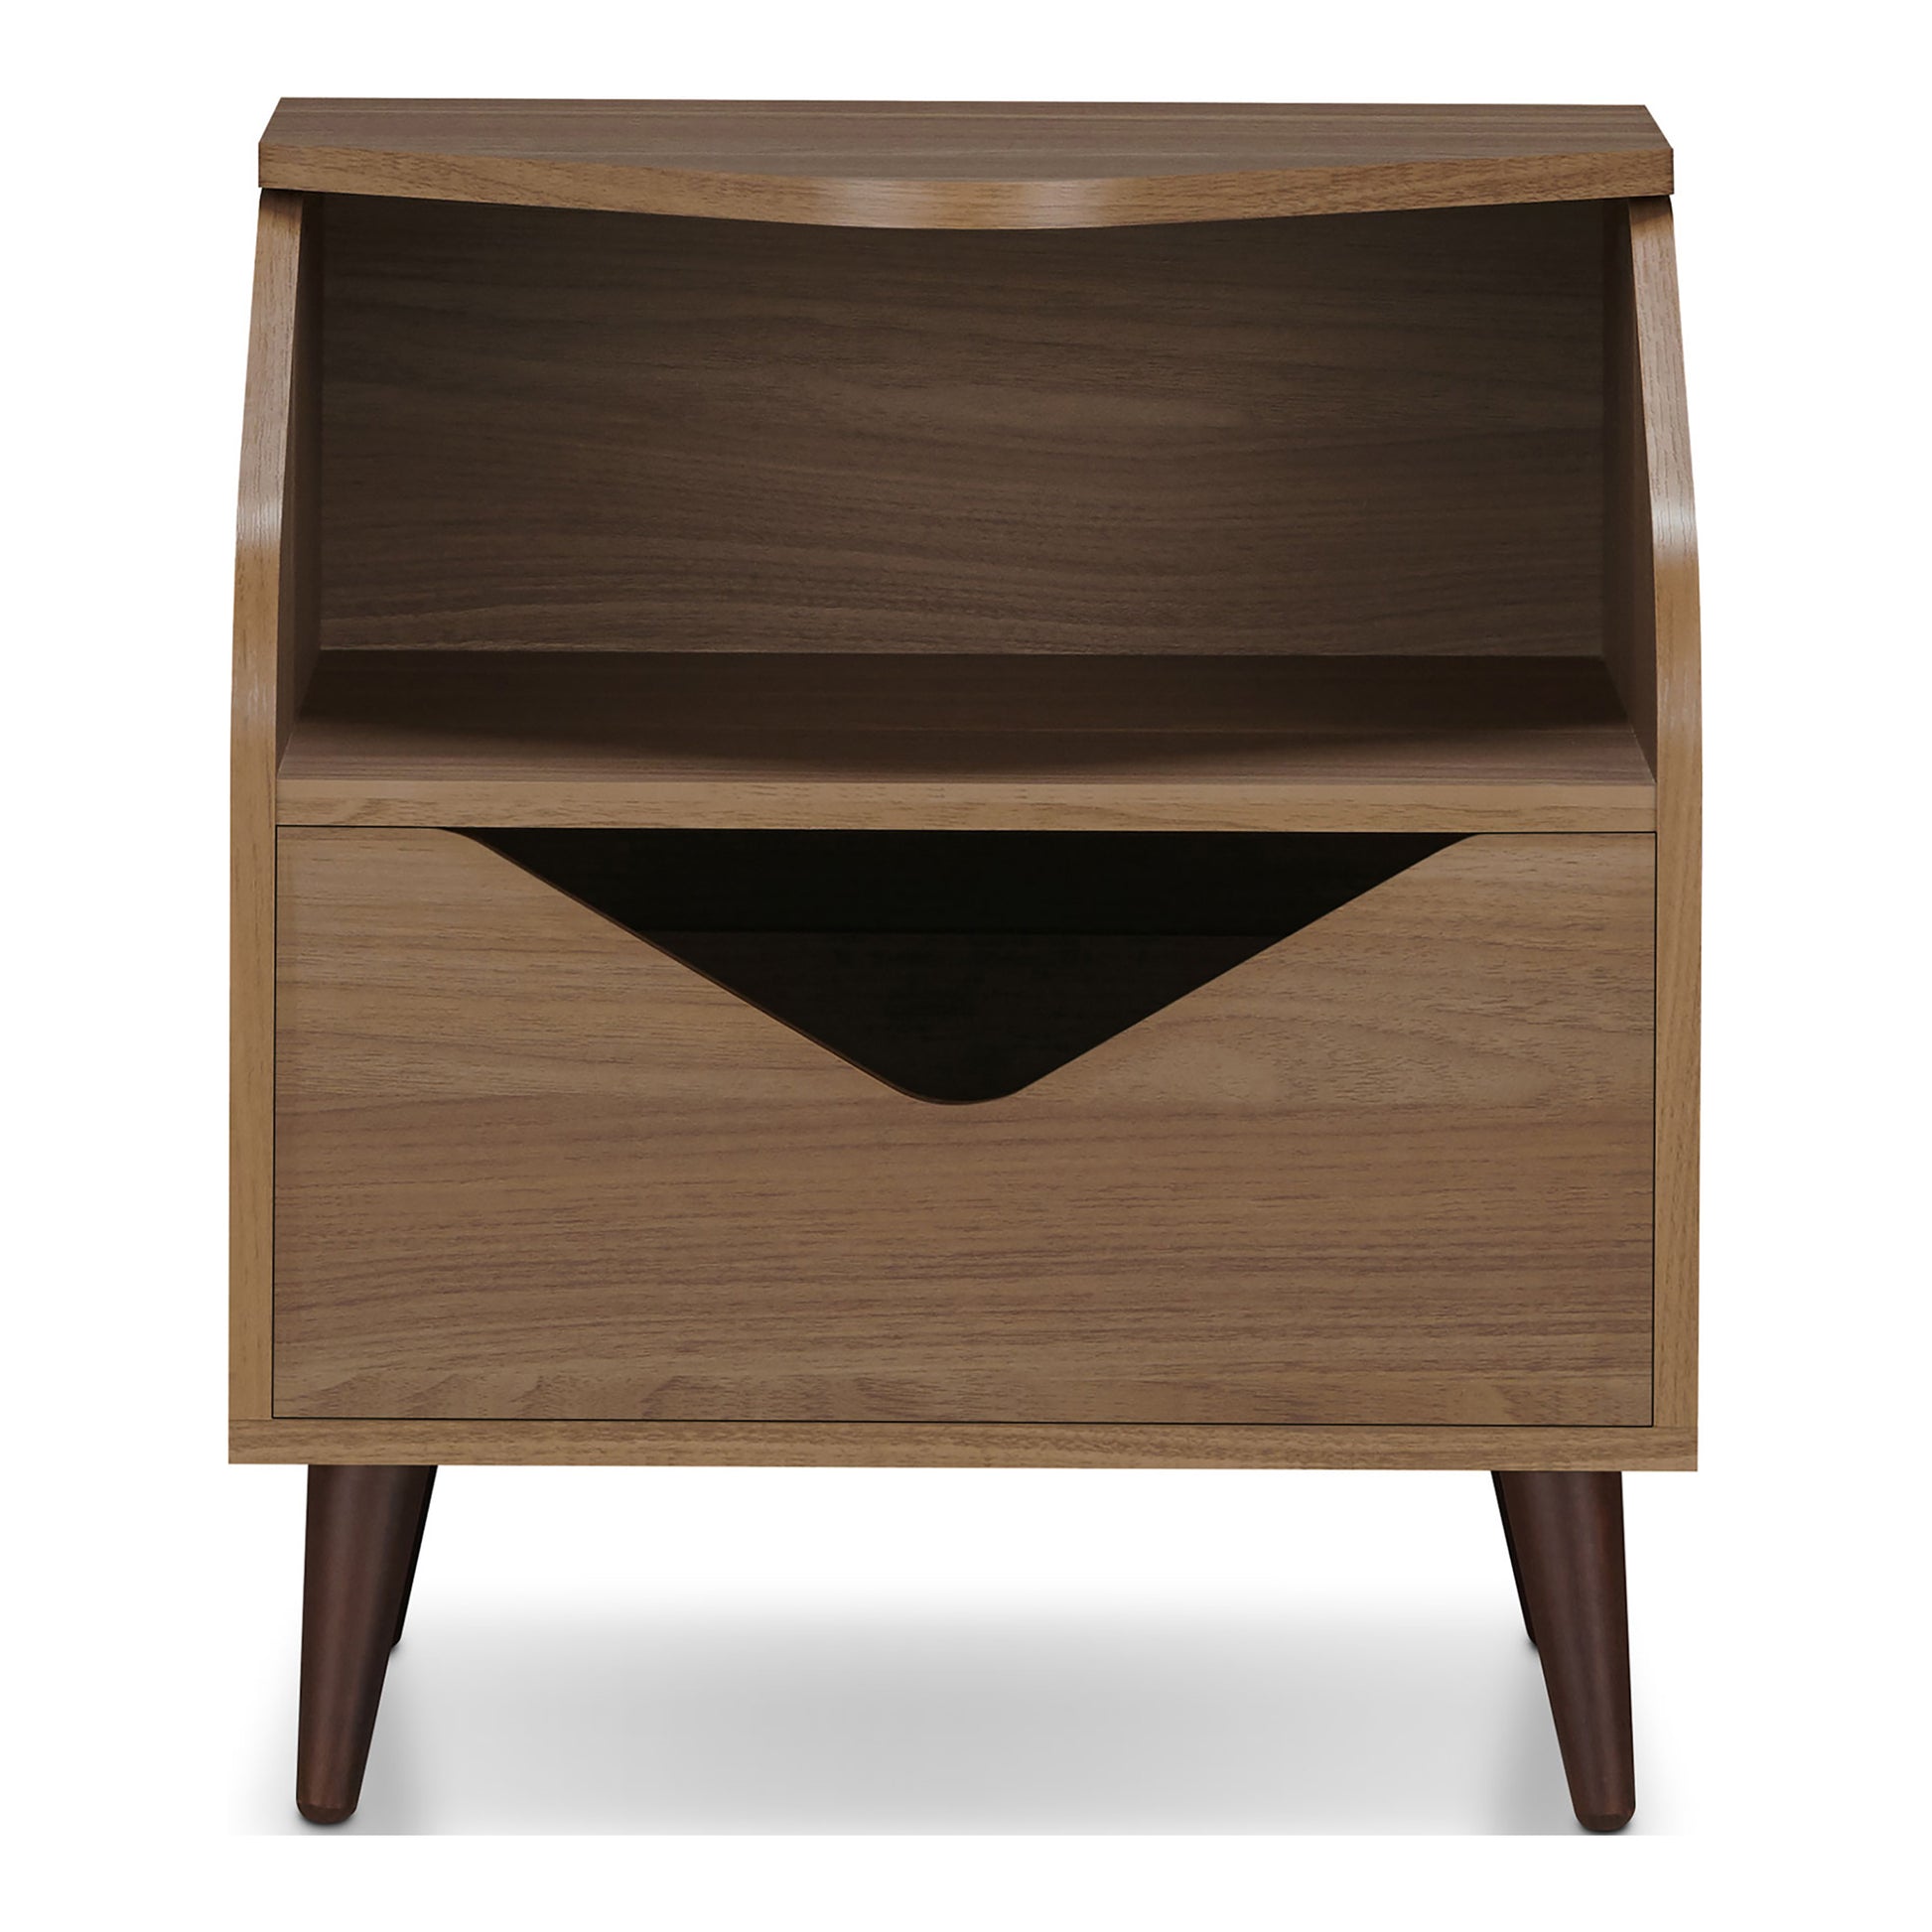 Front-facing mid-century modern honey walnut one-drawer end table on a white background